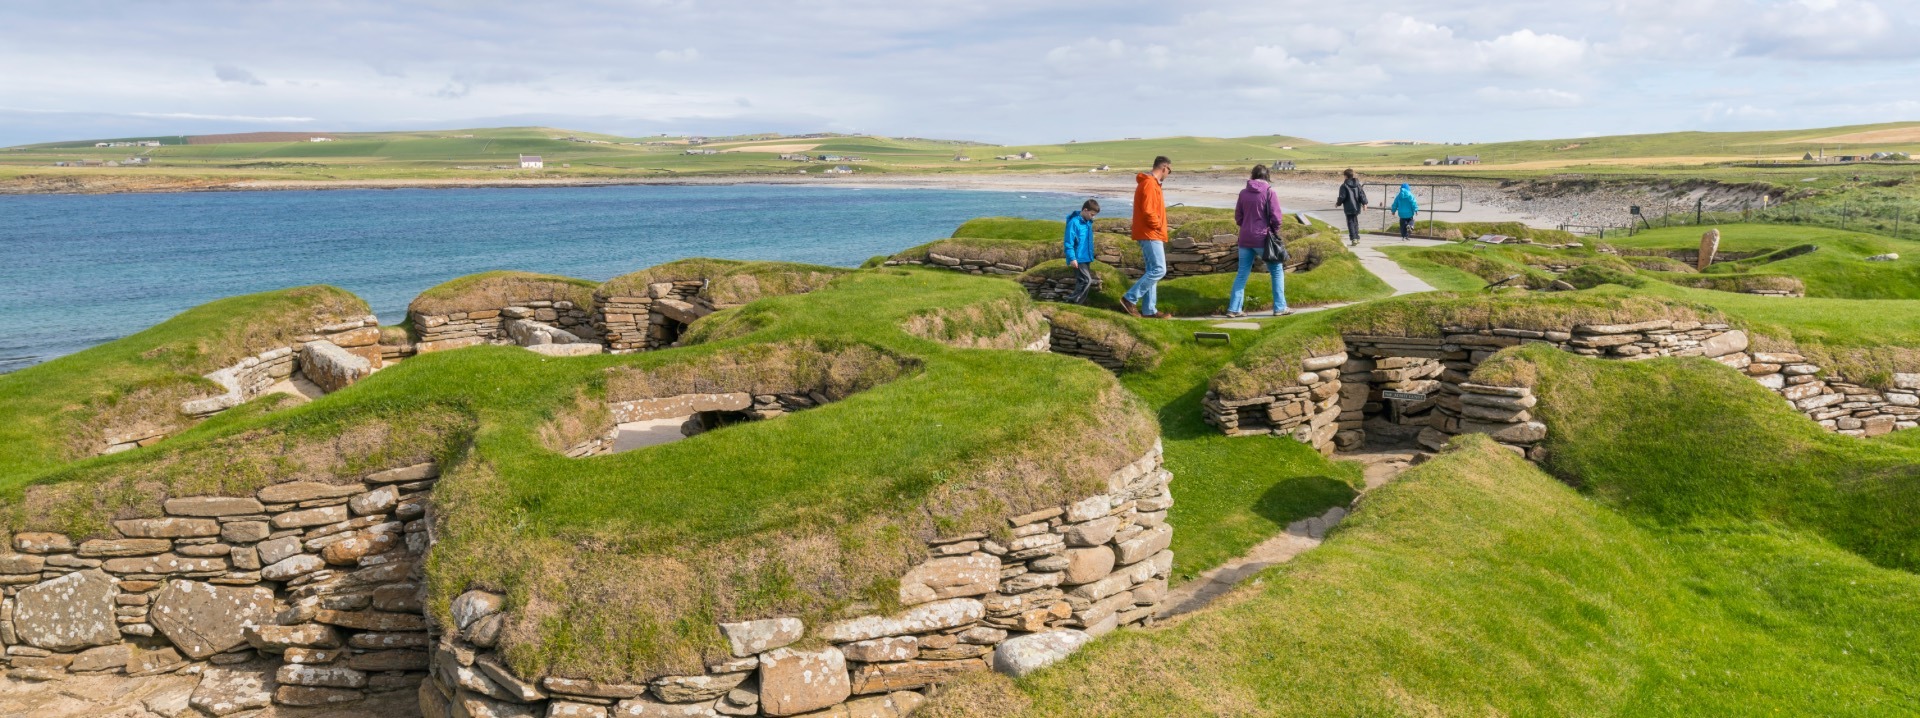 Visitor explore Skara Brae, part of the Neolithic Orkney World Heritage Site, by the Bay of Skail